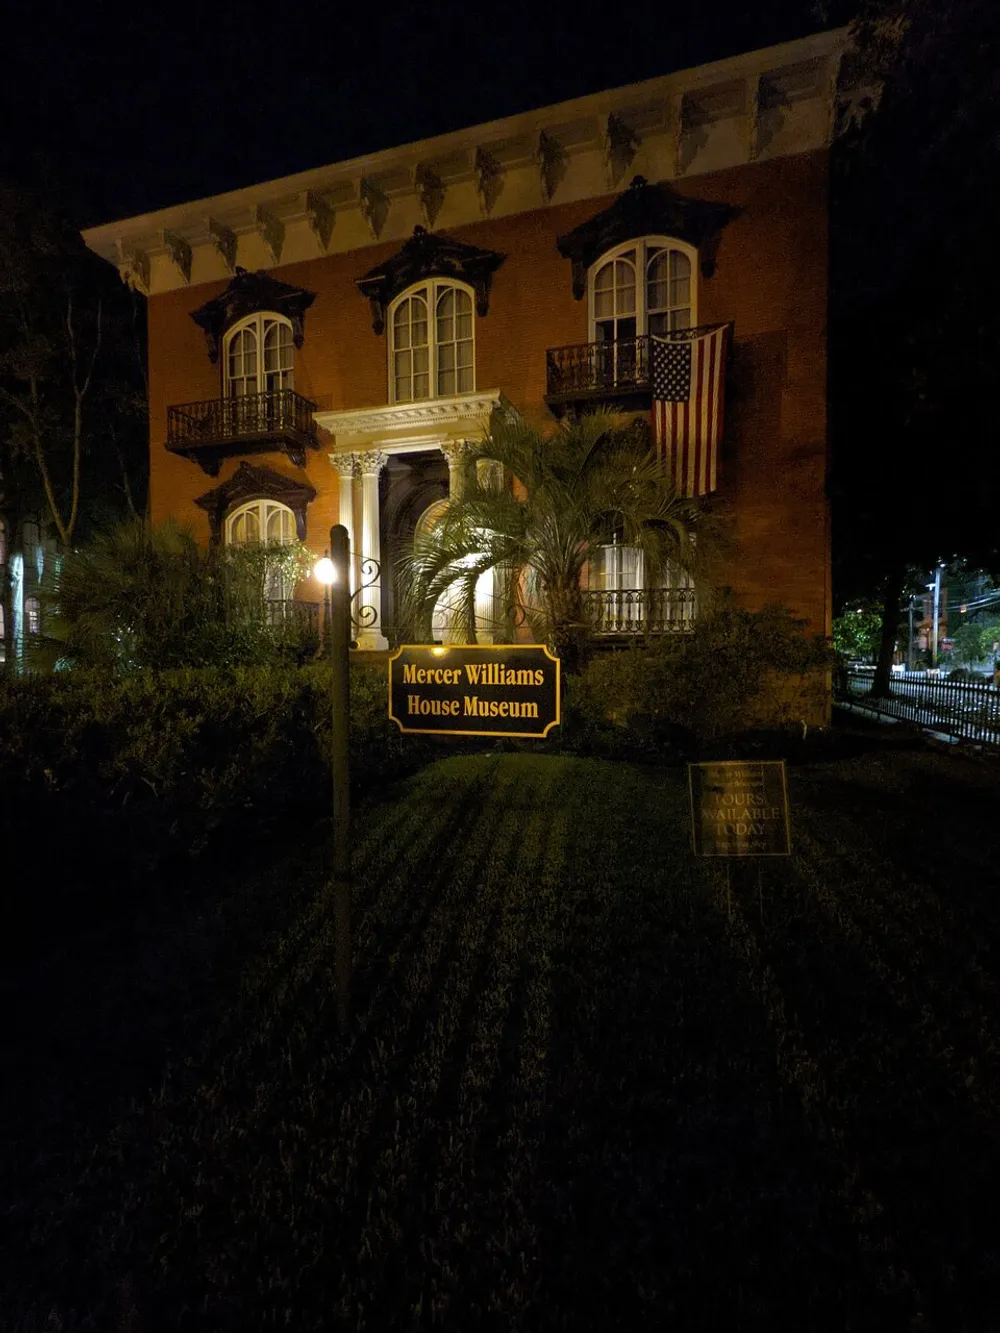 The image shows the exterior of the Mercer Williams House Museum at night illuminated by lamplight and adorned with an American flag with signage in the foreground indicating tours are available